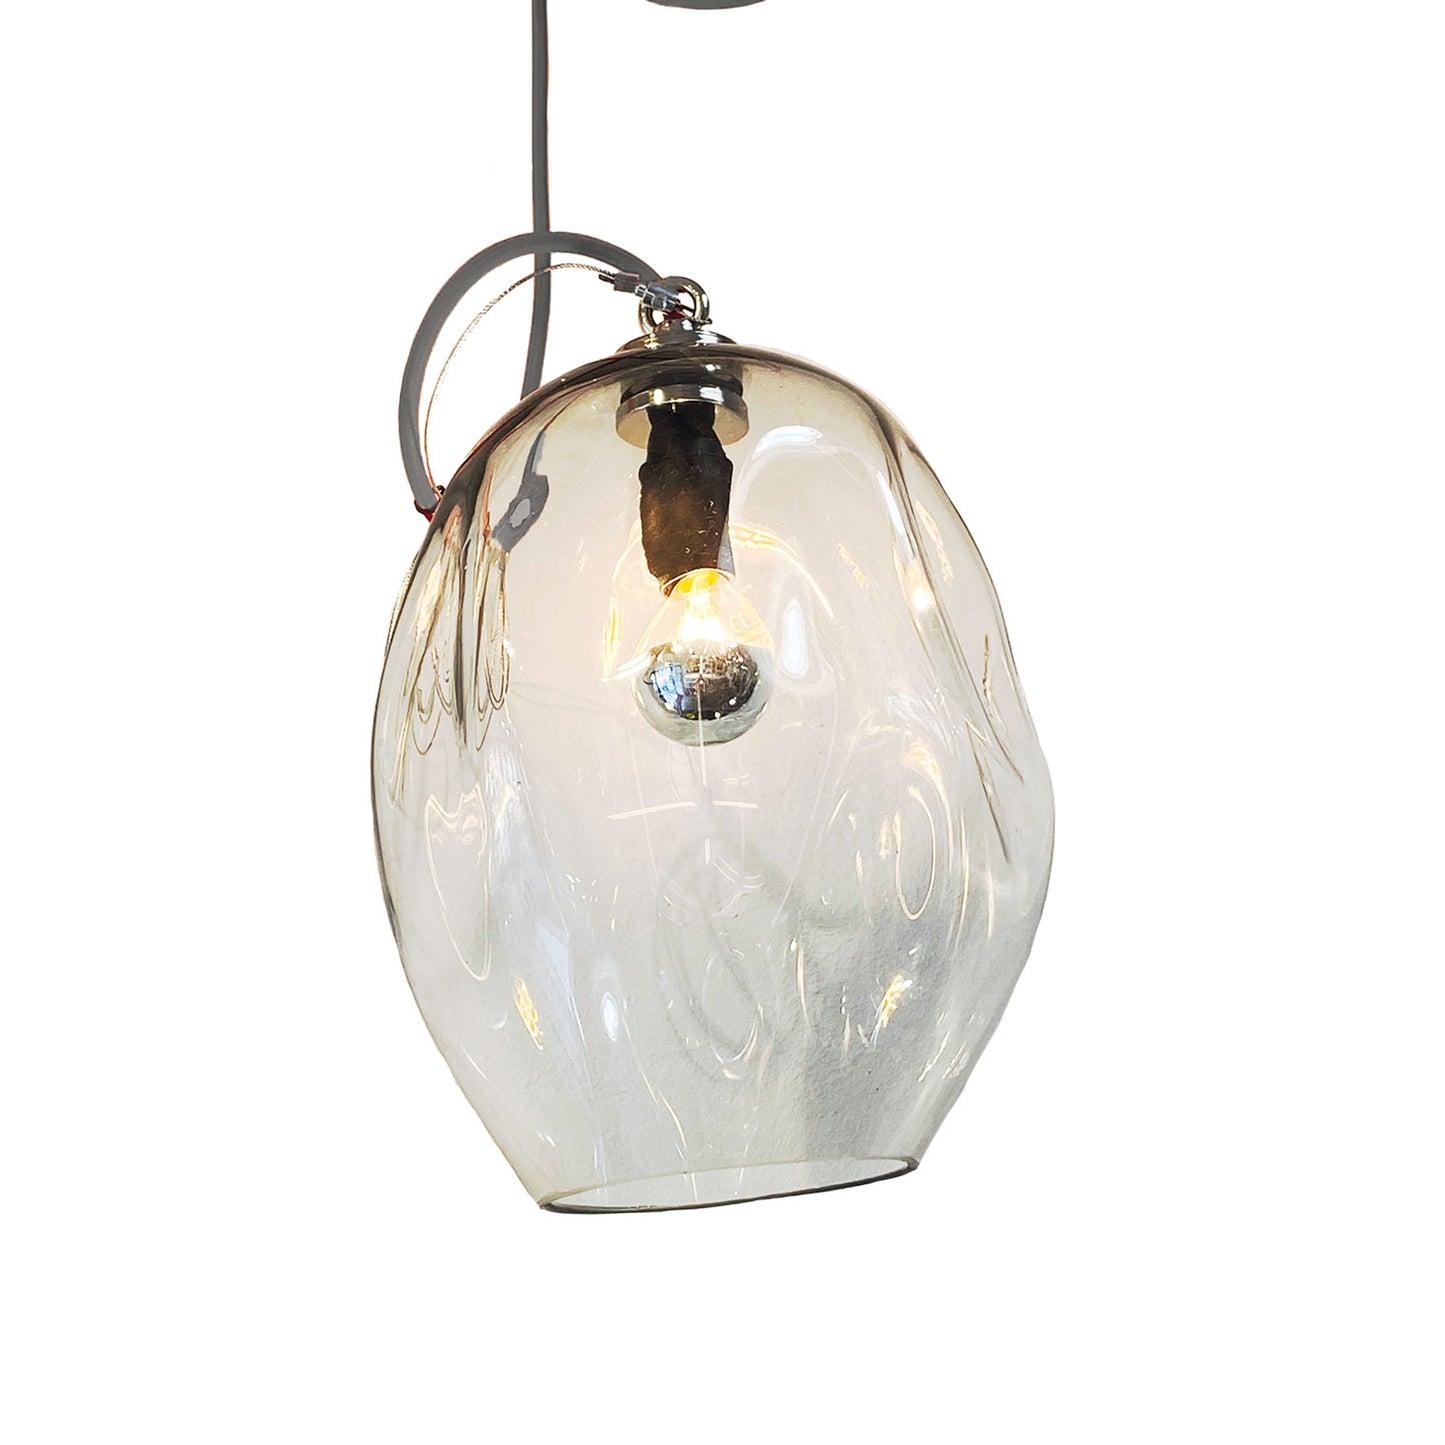 Blown glass lamp - Transparent, Gray Cable